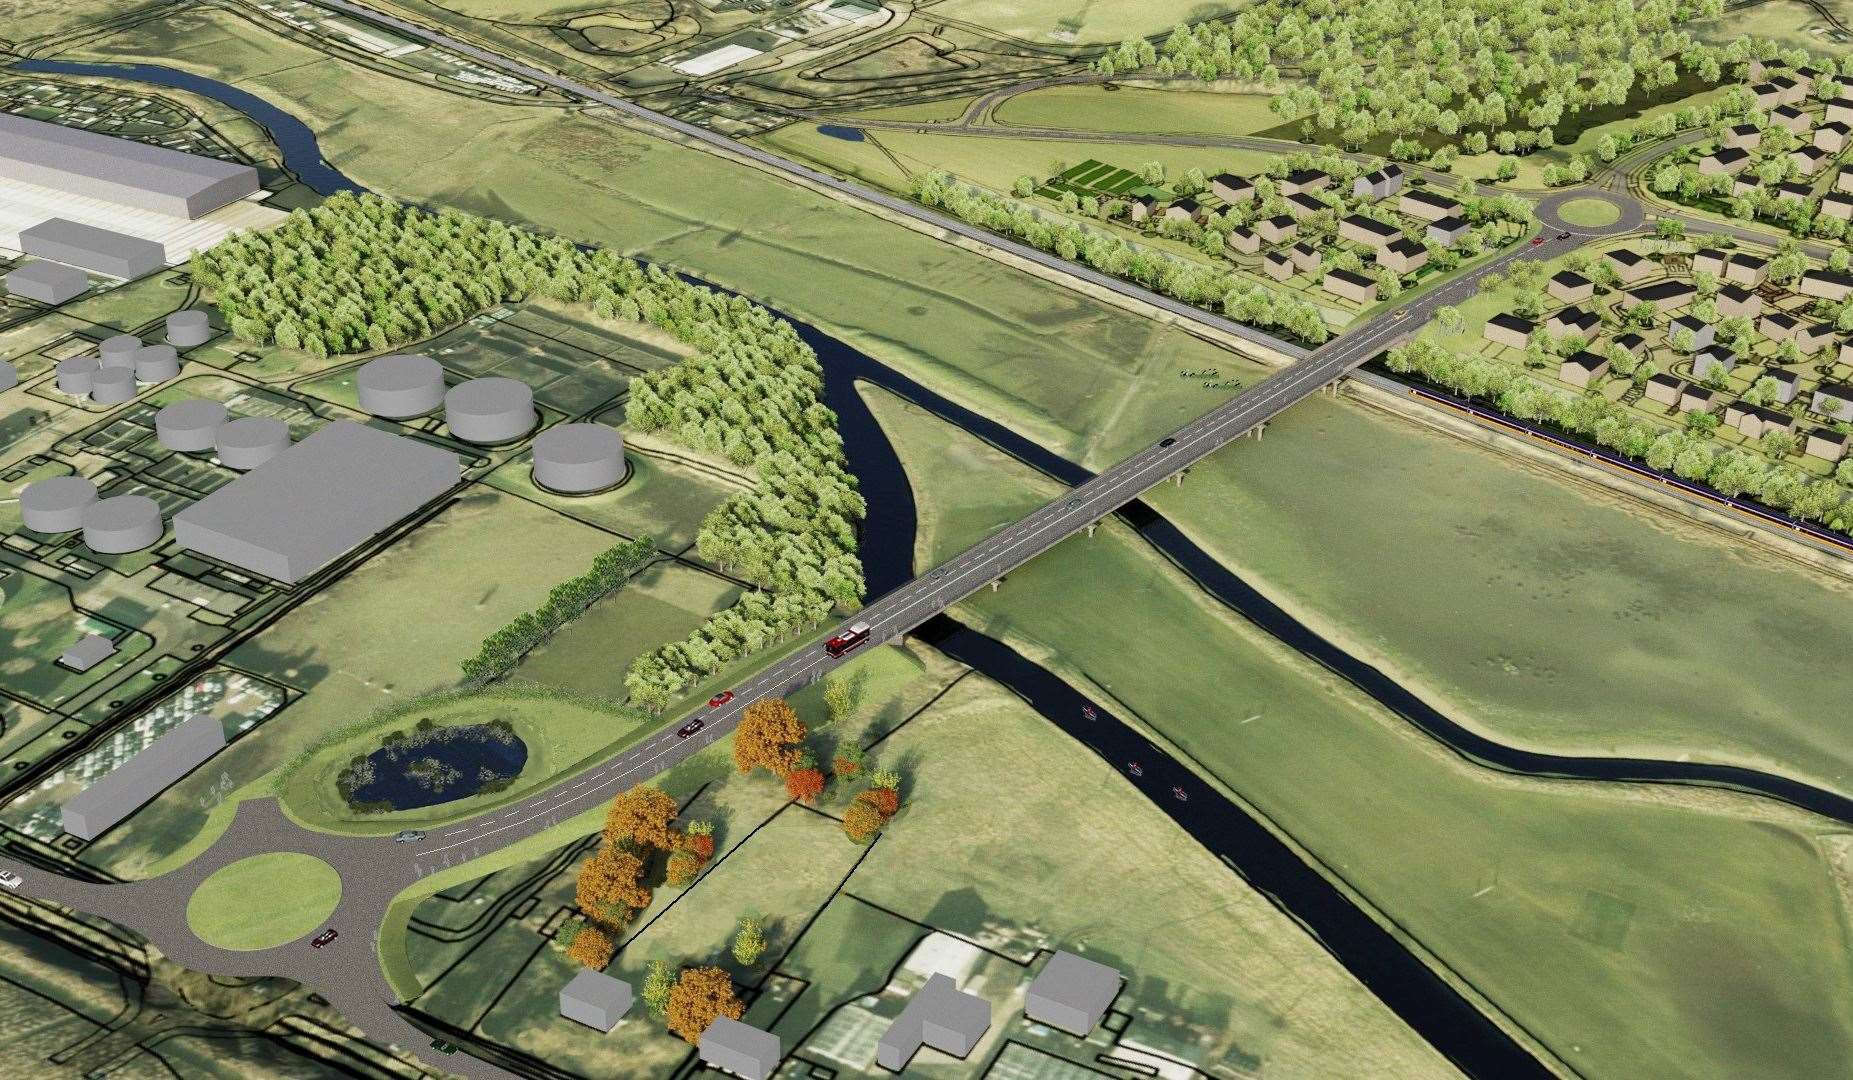 KCC bosses say the latest predicted completion date for the Sturry Link Road is the end of 2026